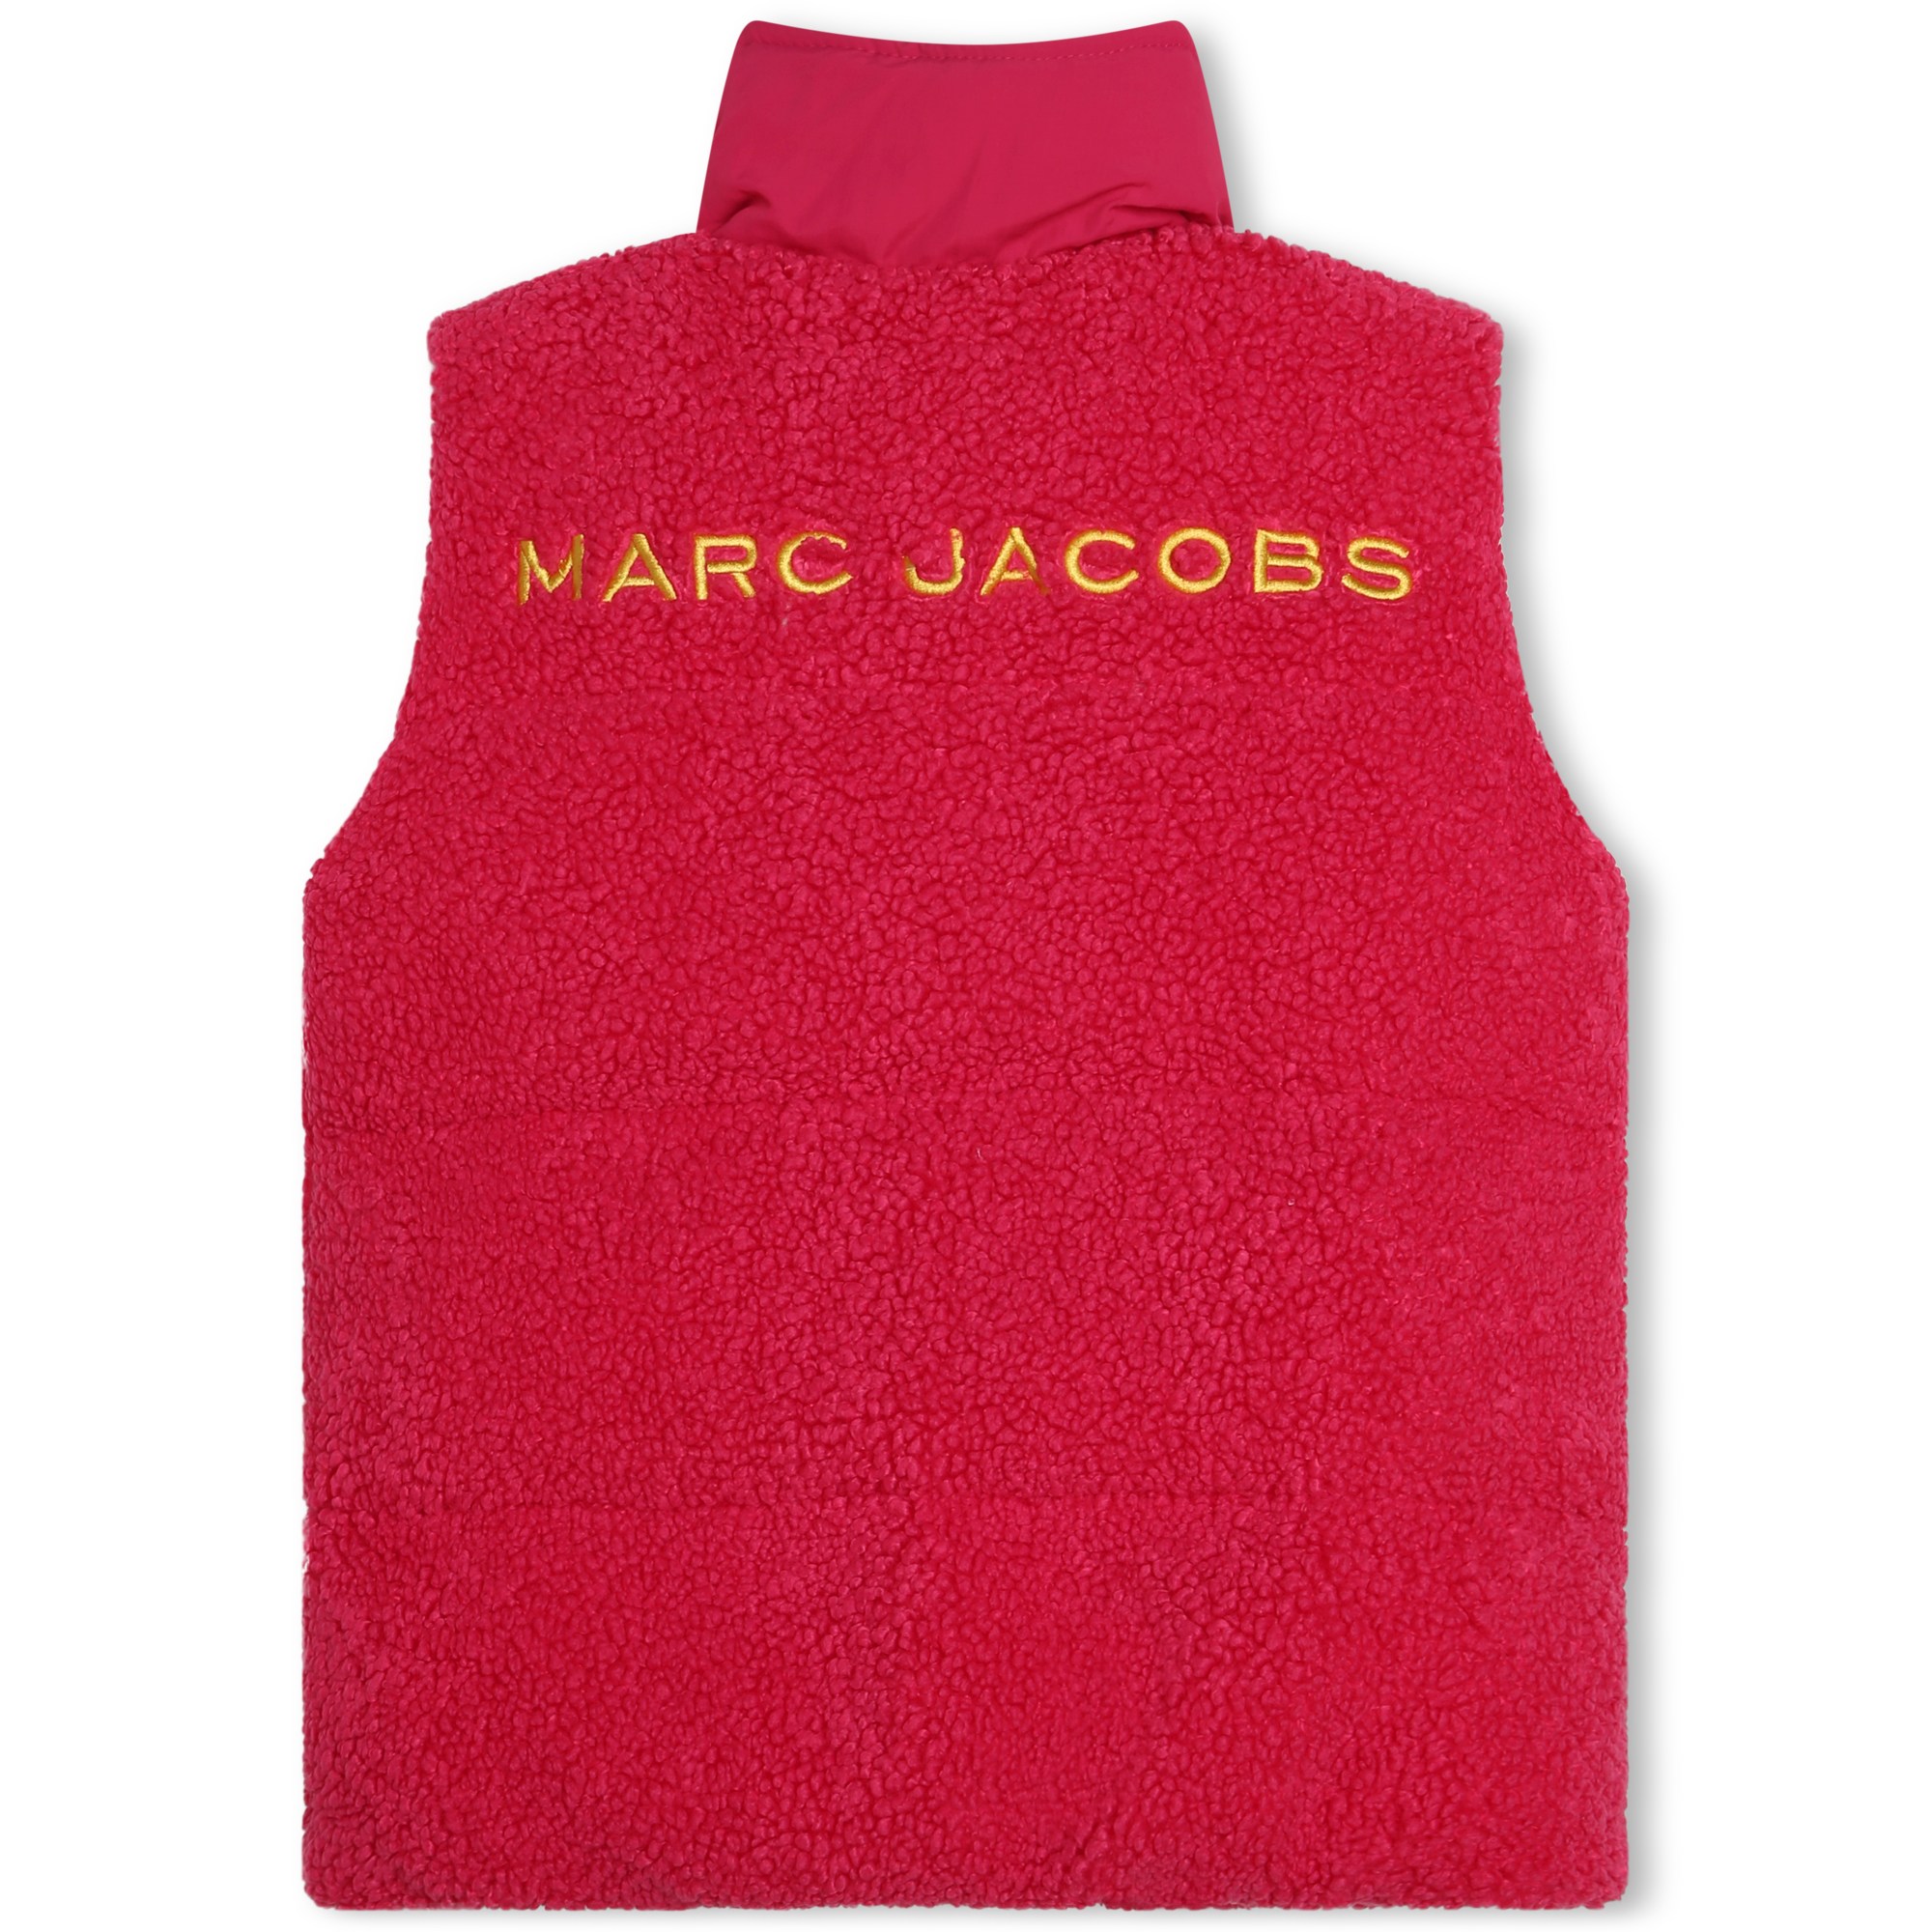 Body warmer MARC JACOBS for GIRL